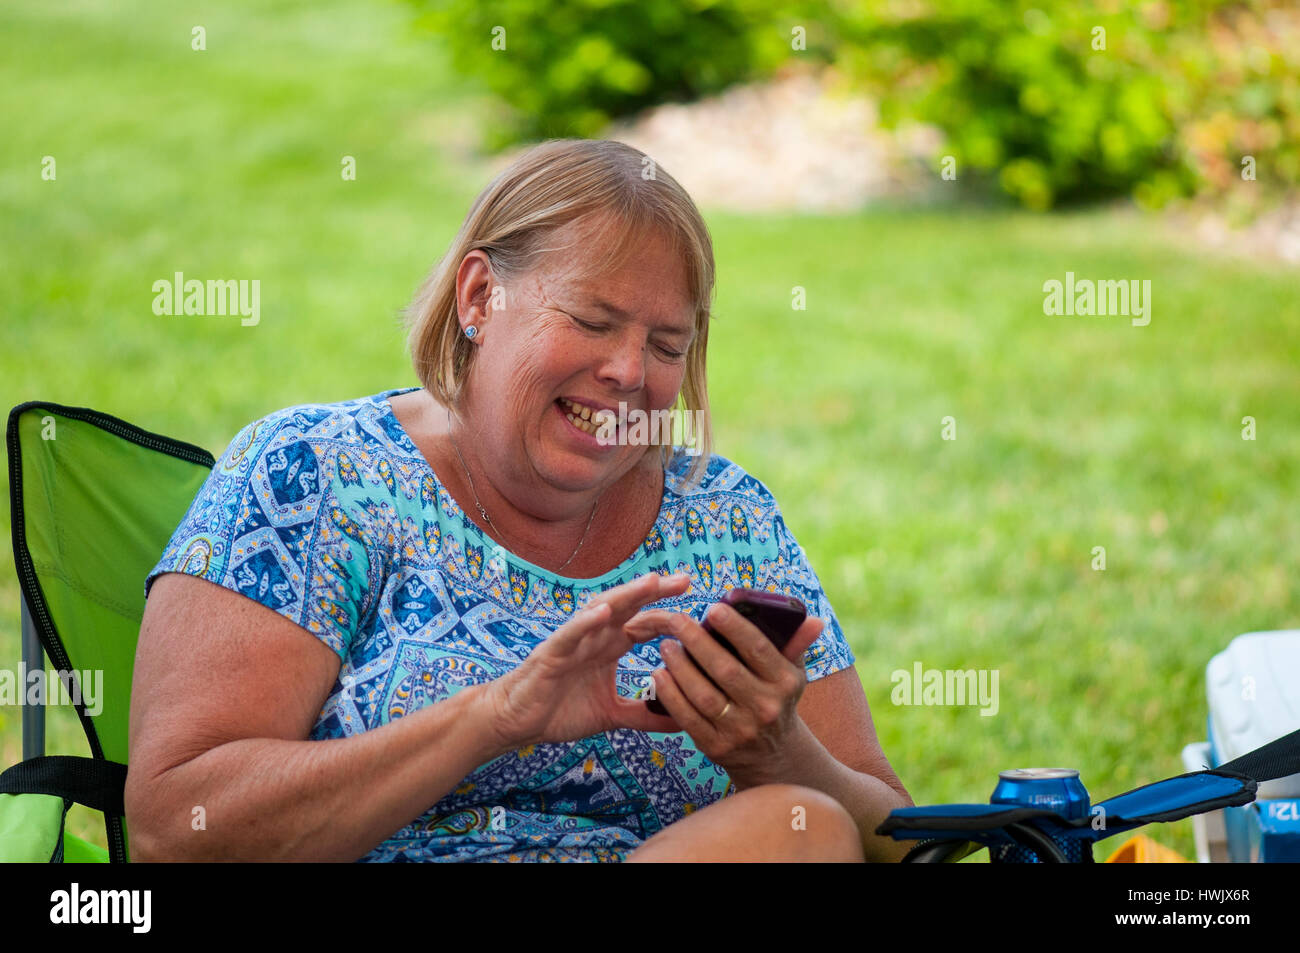 50-55 YEAR OLD CAUCASIAN WOMAN LAUGHING WHILE TEXTING ON HER IPHONE. Stock Photo